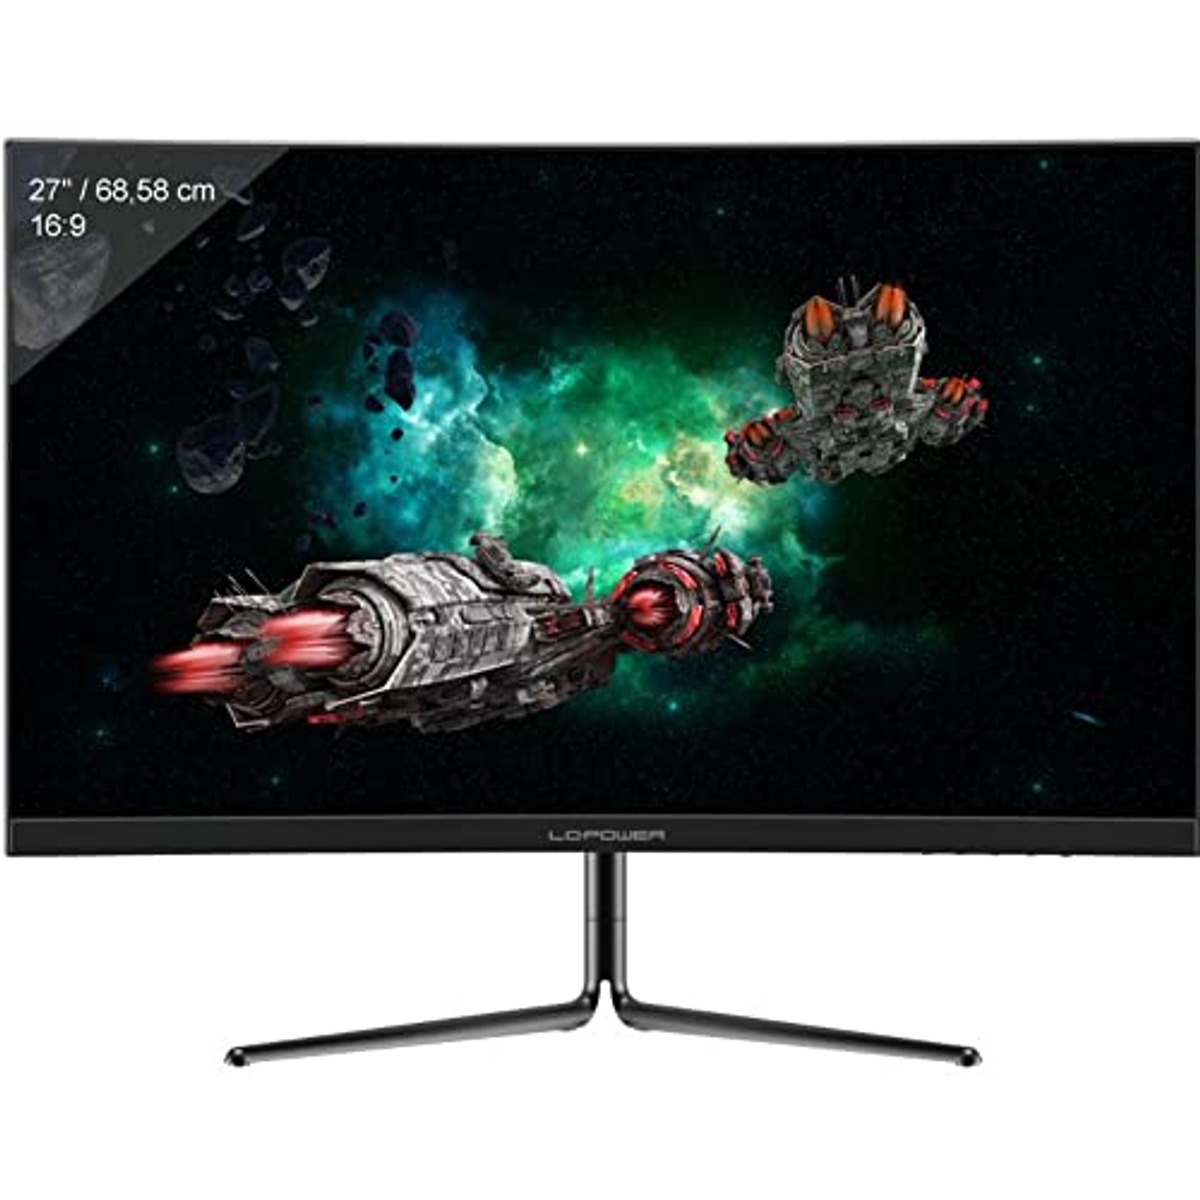 Full-HD nativ) Hz ms 27 Zoll LC-M27-FHD-165-C-V2 165 , Monitor, , Hz Gaming-Monitor POWER Reaktionszeit 165 (1 LC